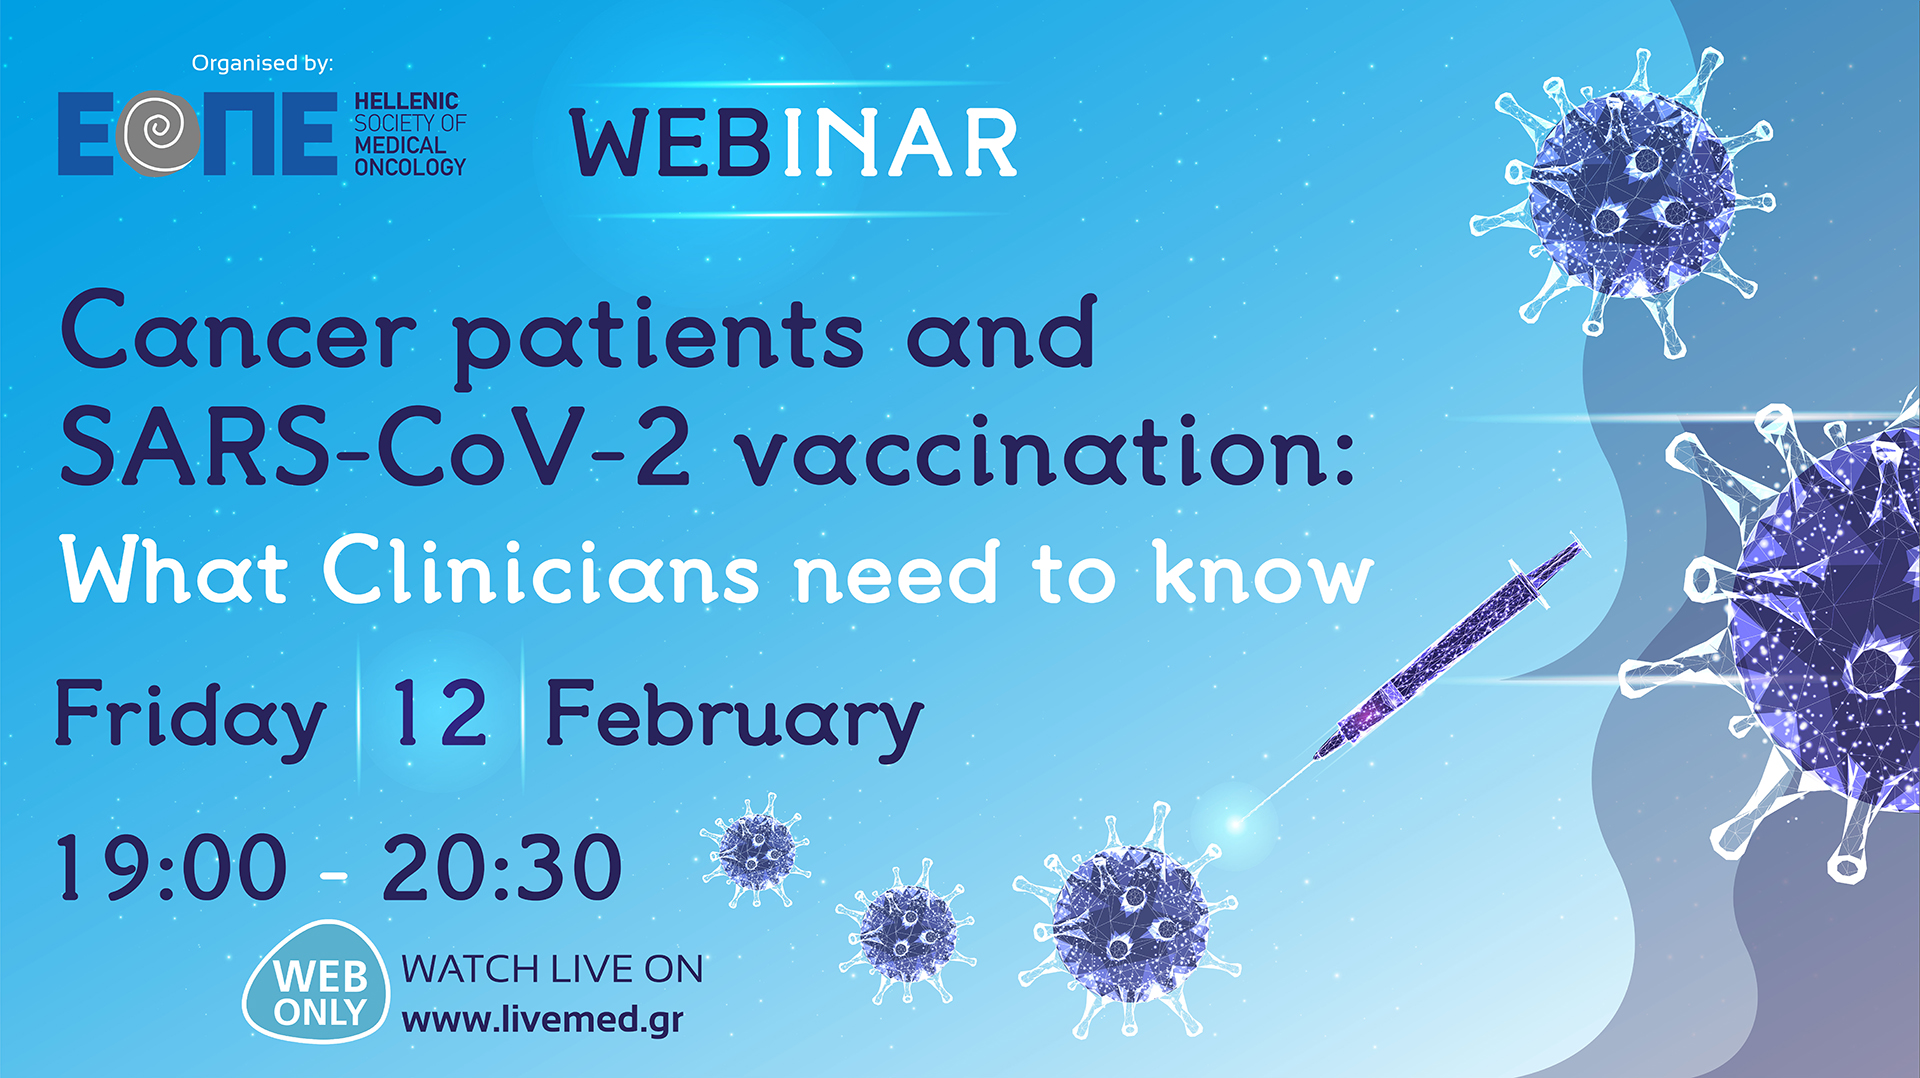 Webinar: Cancer patients and SARS-CoV-2 vaccination: What Clinicians need to know